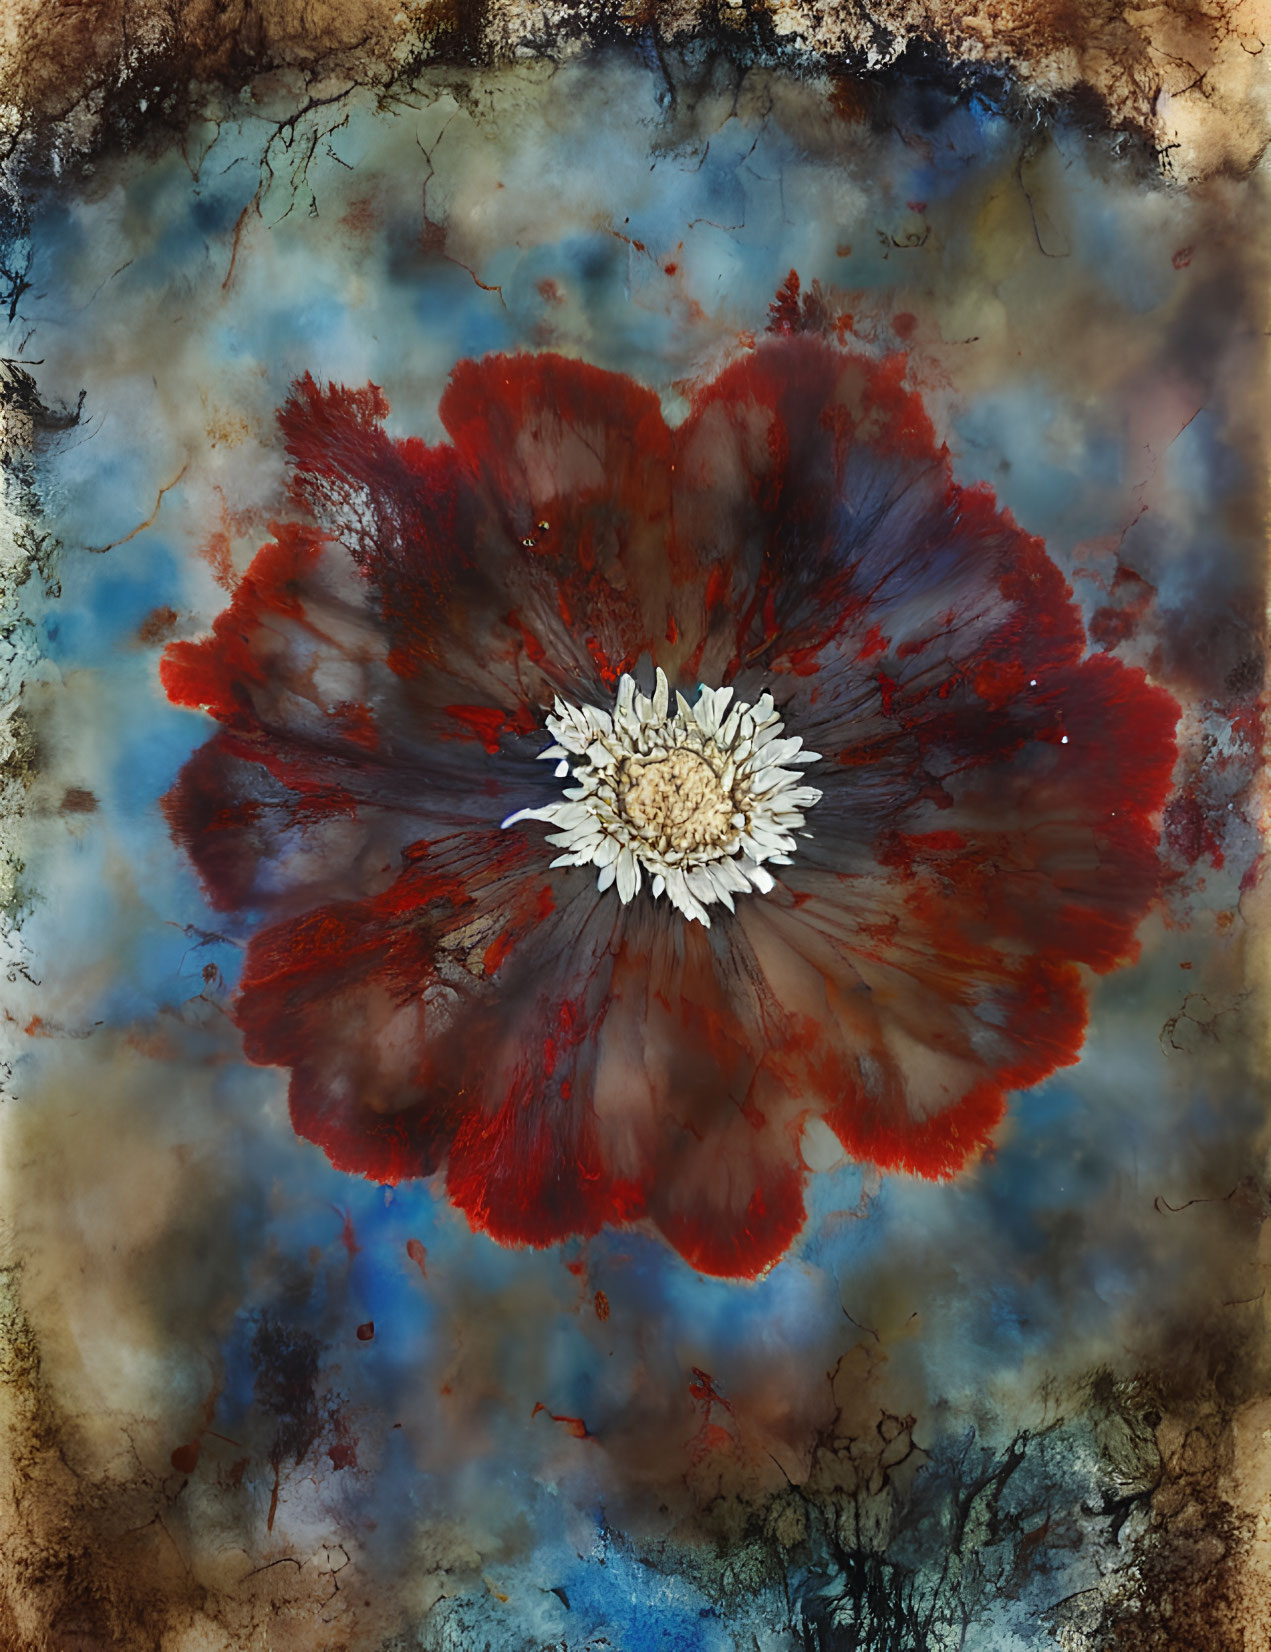 Abstract image of red petal flower on blue and brown background